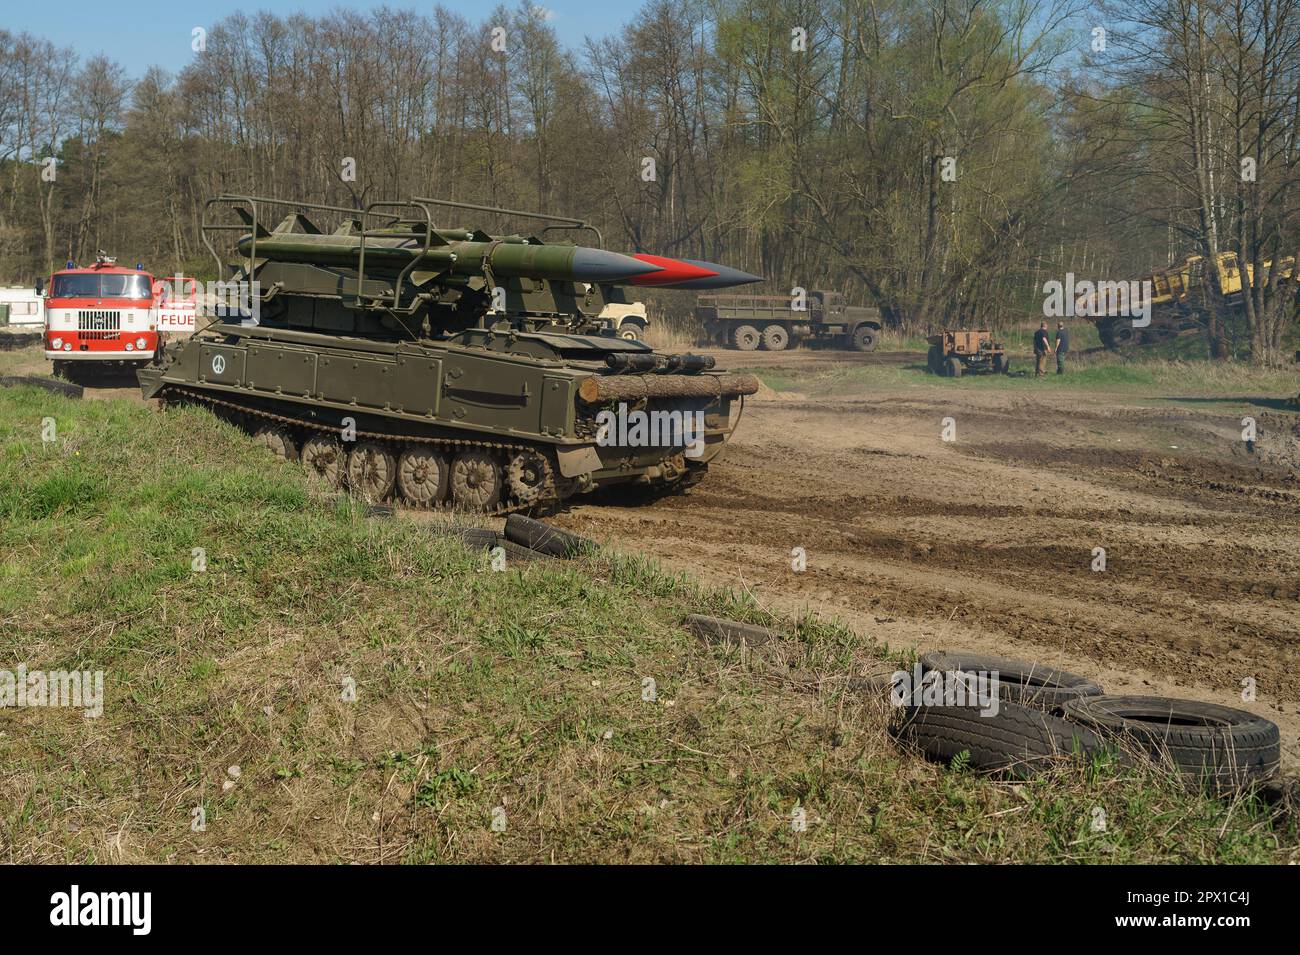 Soviet mobile surface-to-air missile system 2K12 Kub. Meeting of fans of retro cars of the Eastern bloc (Ostfahrzeugtreffen). Stock Photo